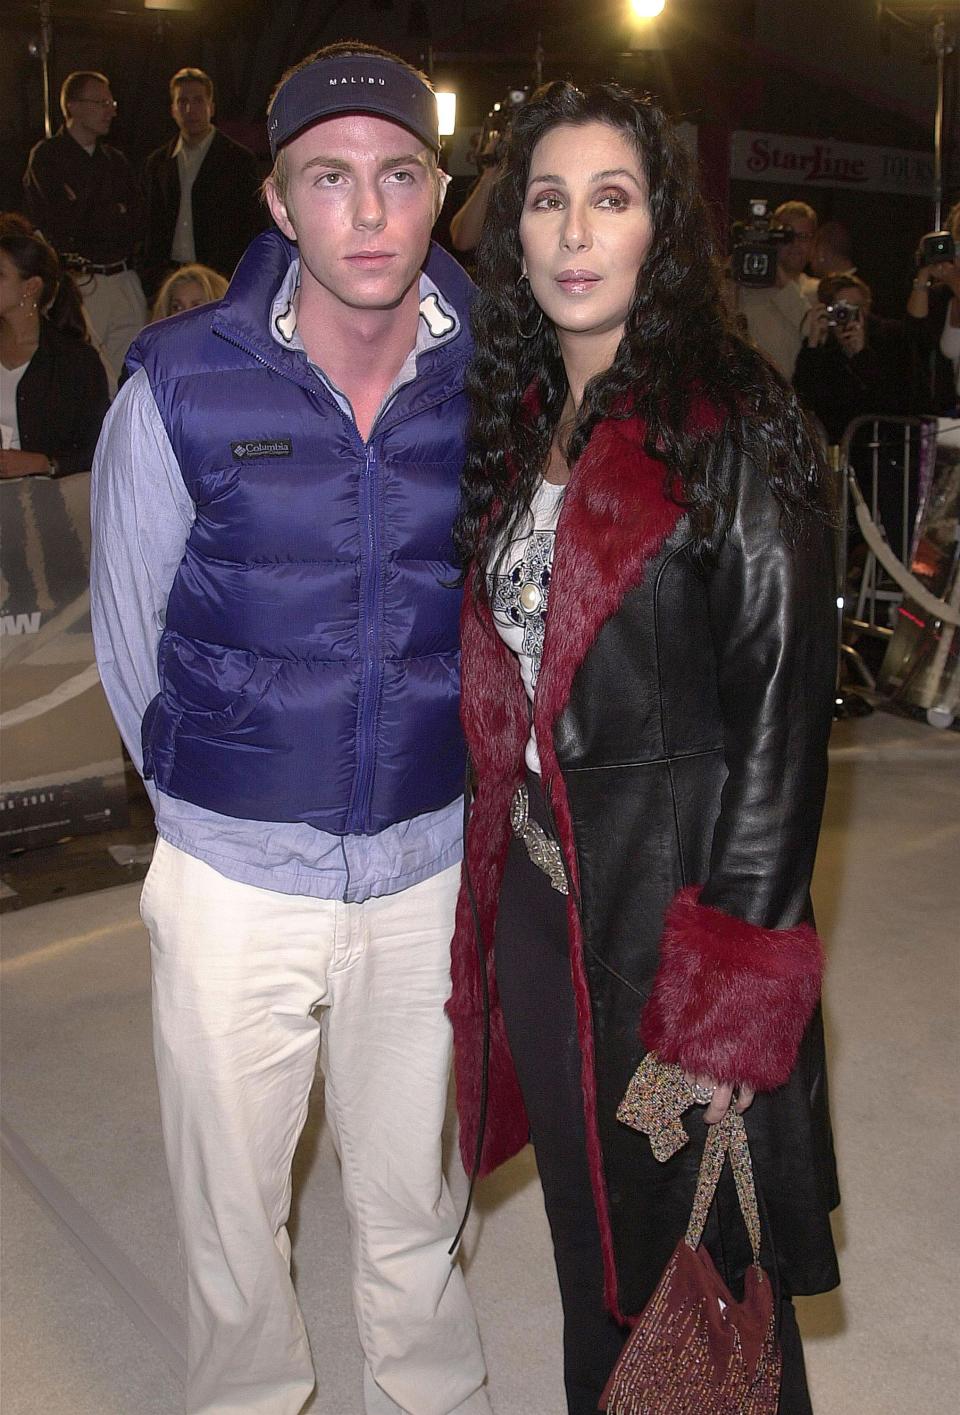 Cher and Elijah Blue at the premiere of the film "Blow" March 29, 2001 at the Mann's Chinese Theatre in Hollywood, Calif.